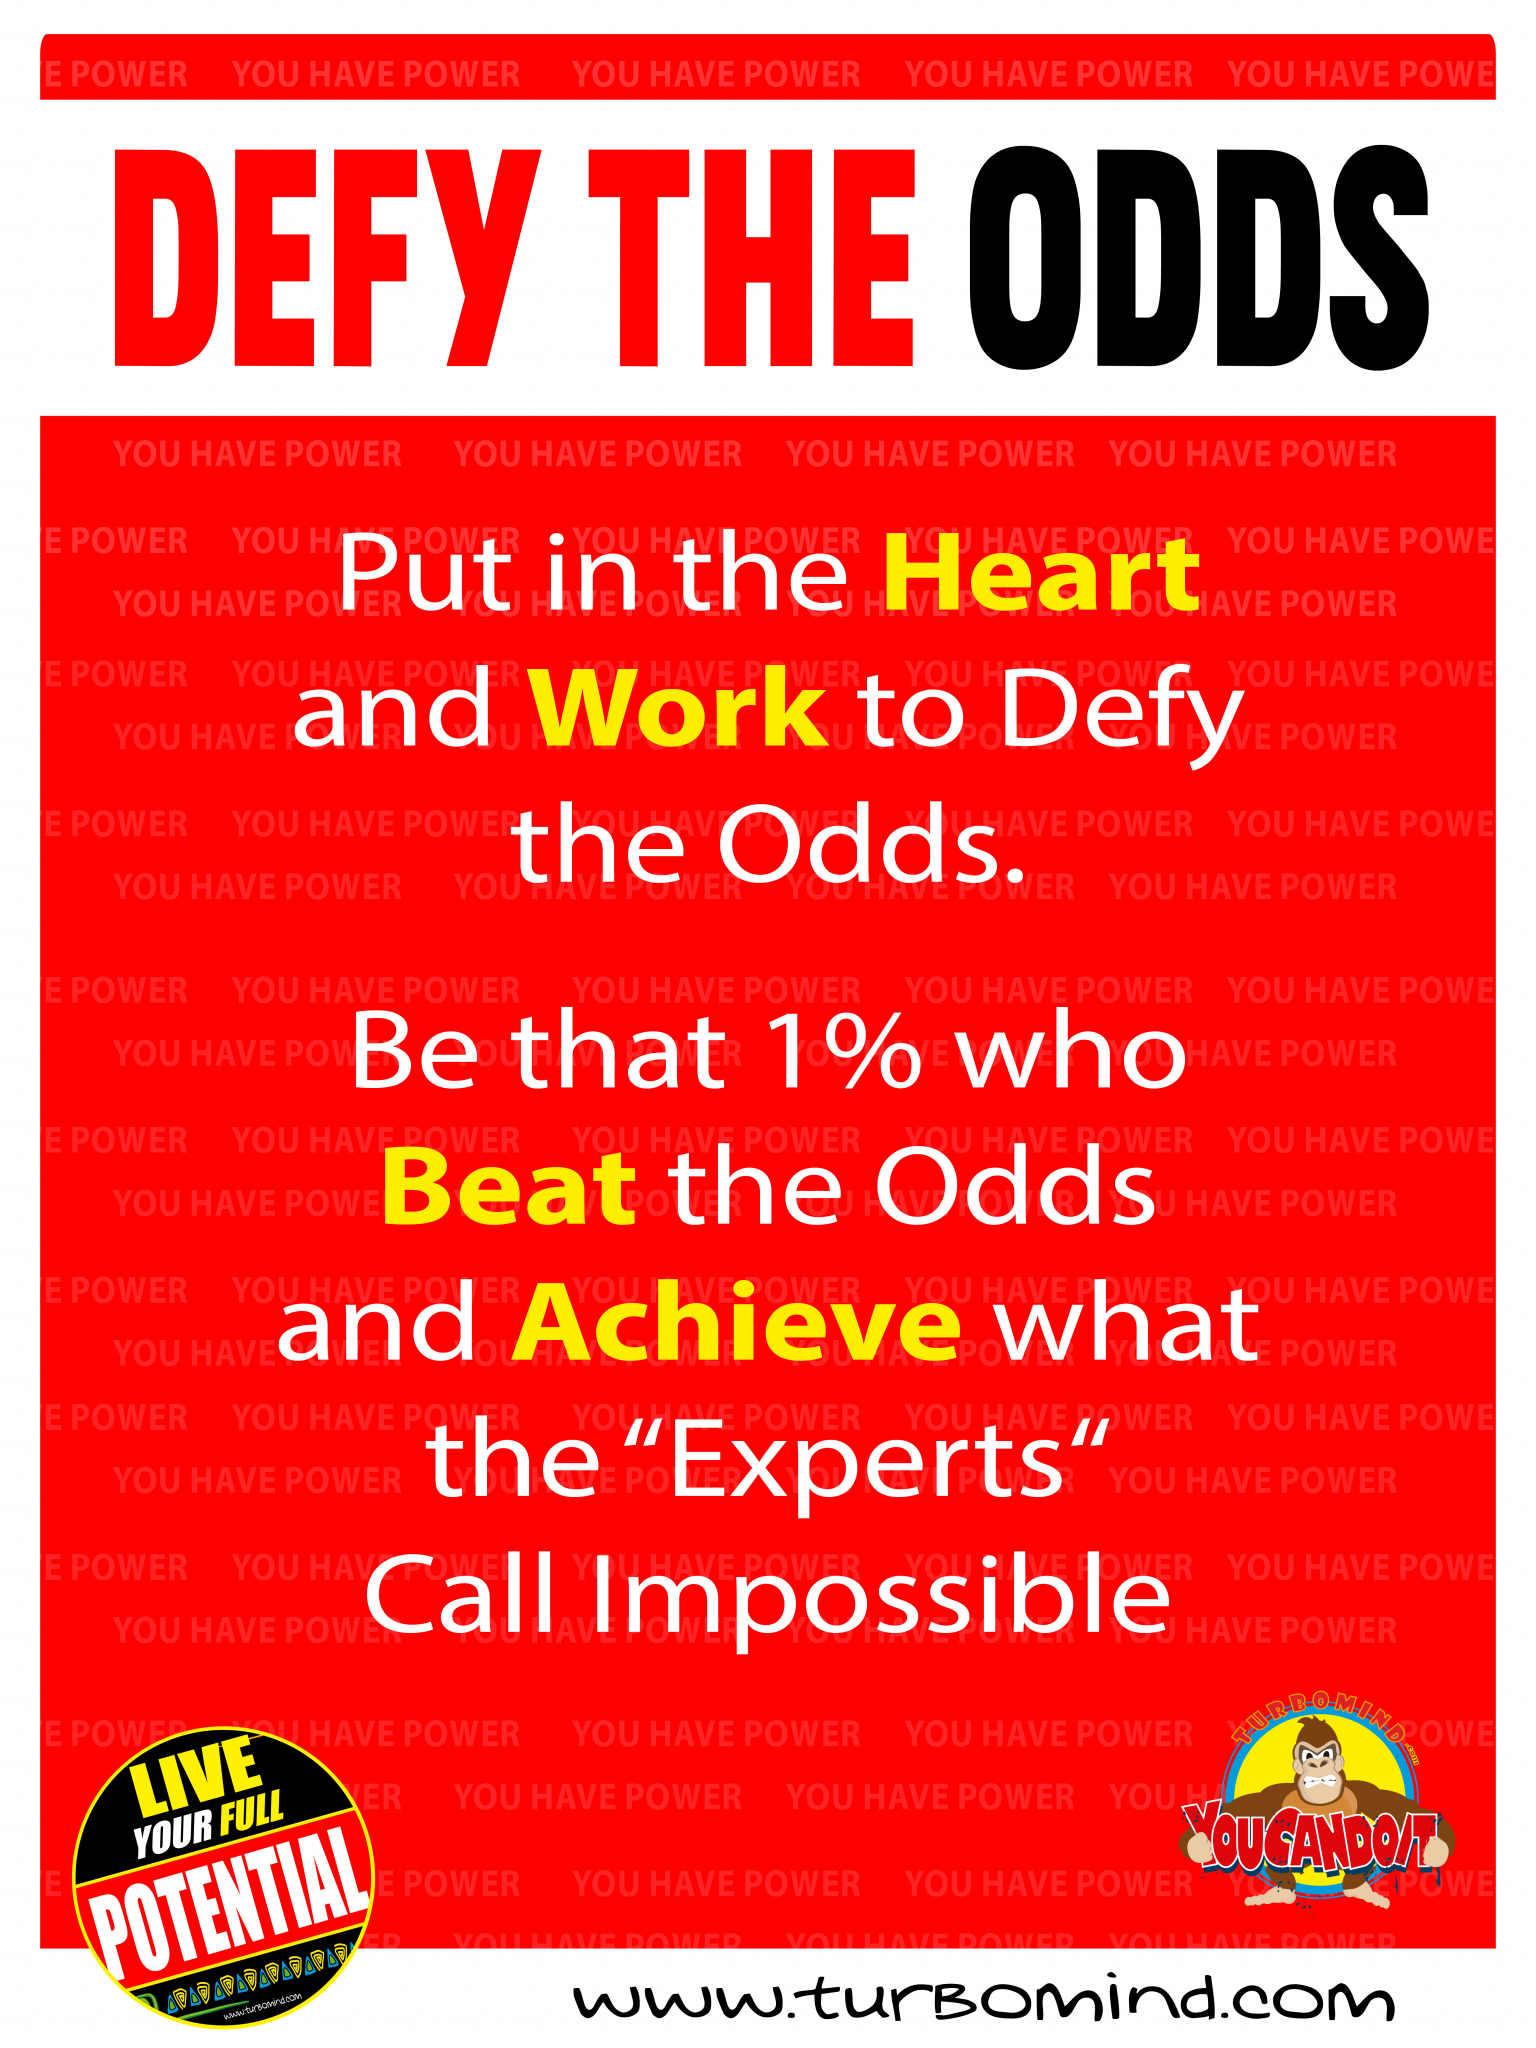 "Defy the odds" https://www.turbomind.com/